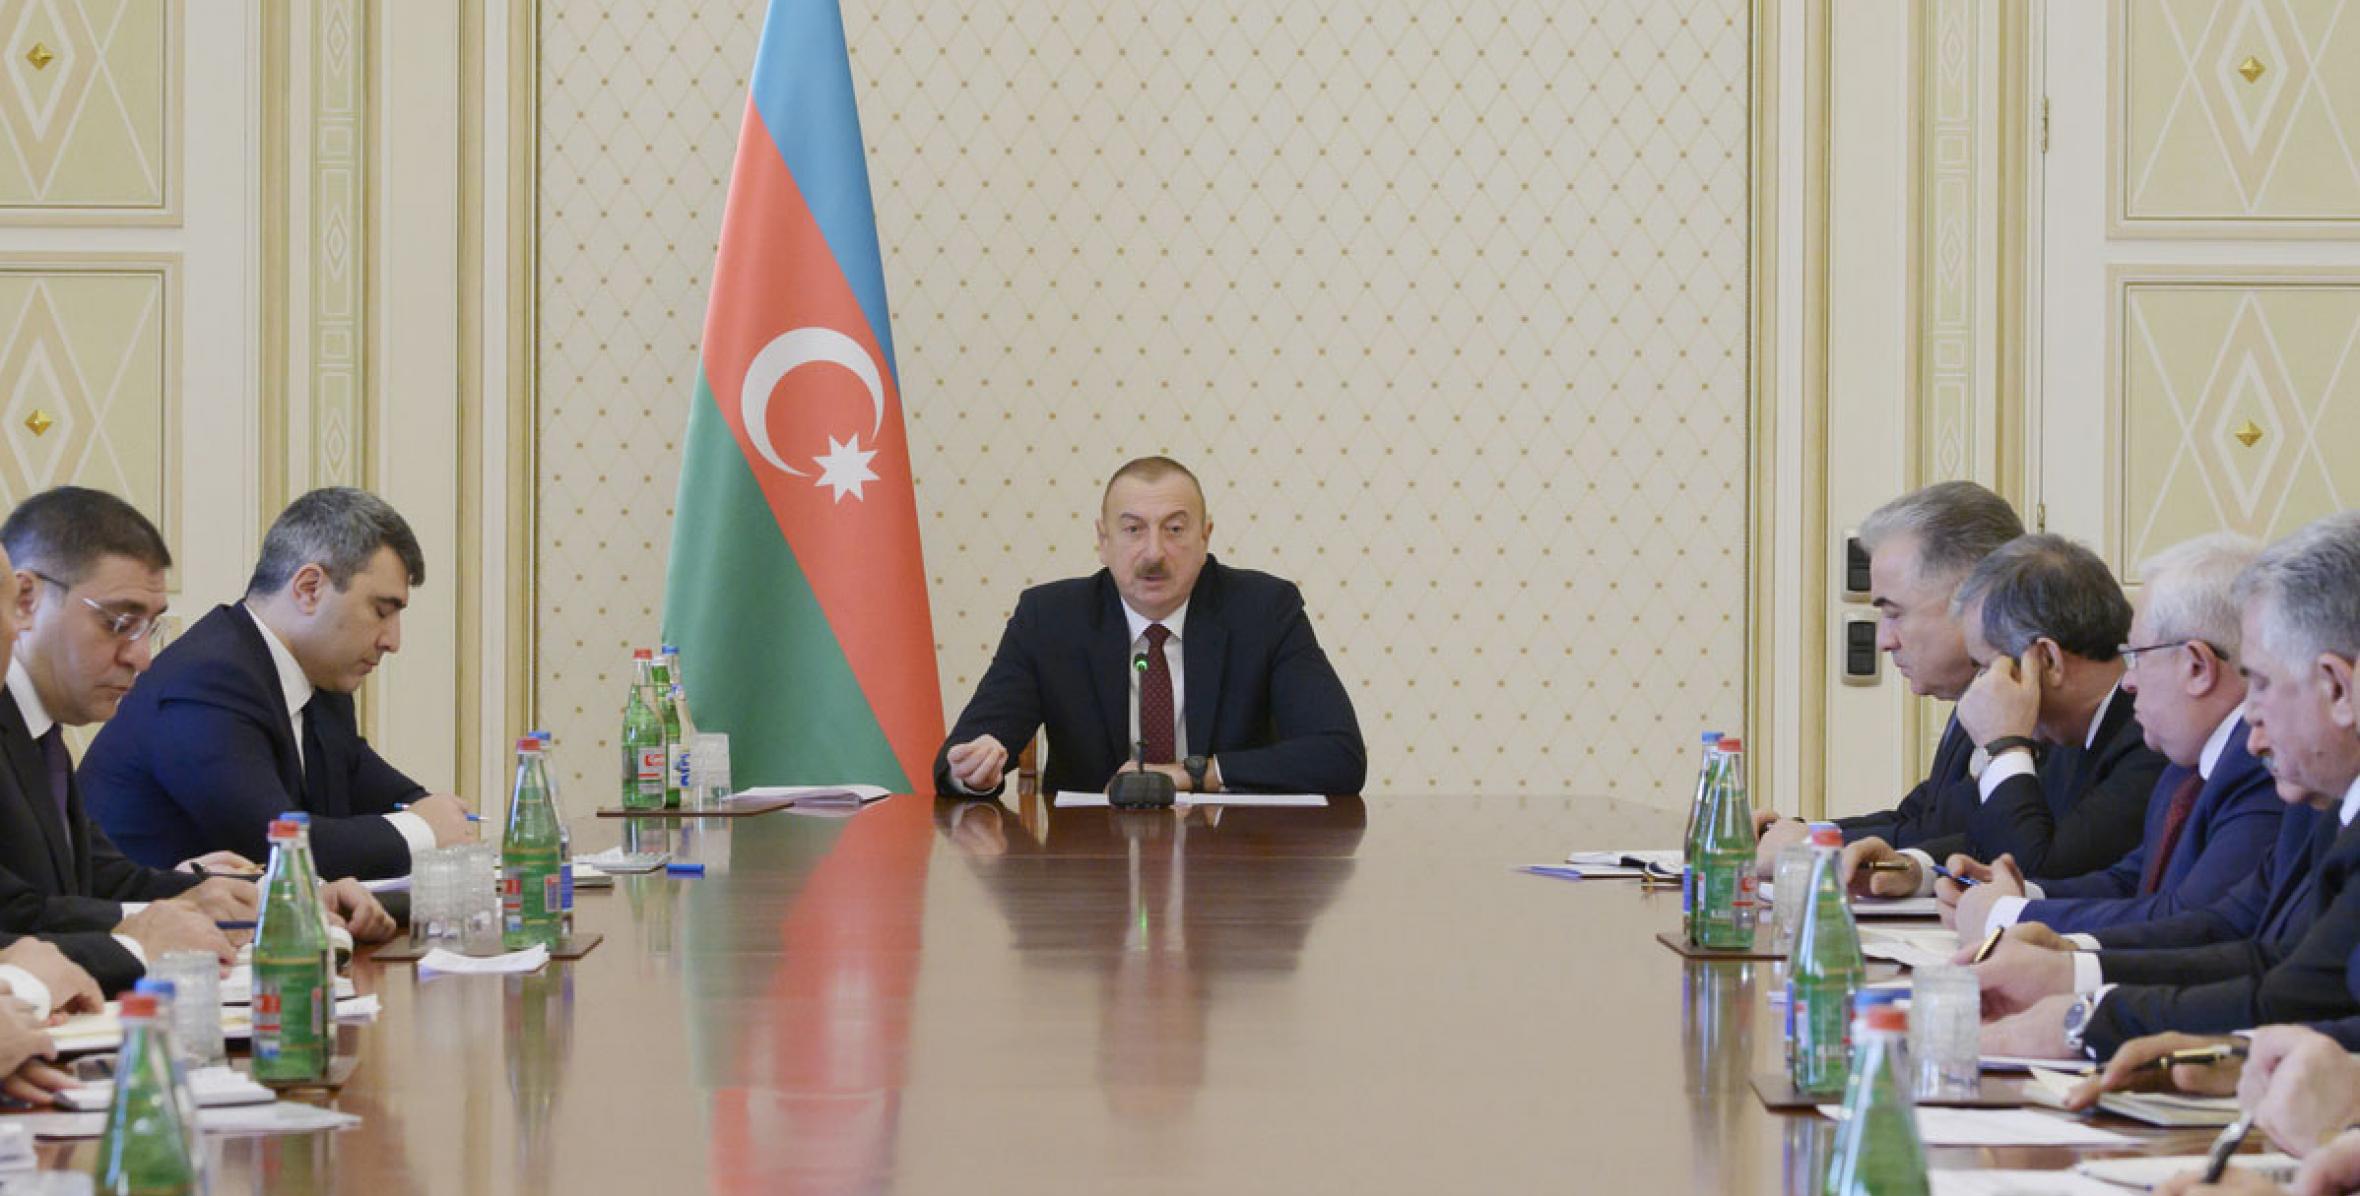 Opening speech by Ilham Aliyev at the meeting on results of cotton-growing season and measures to be taken in 2020